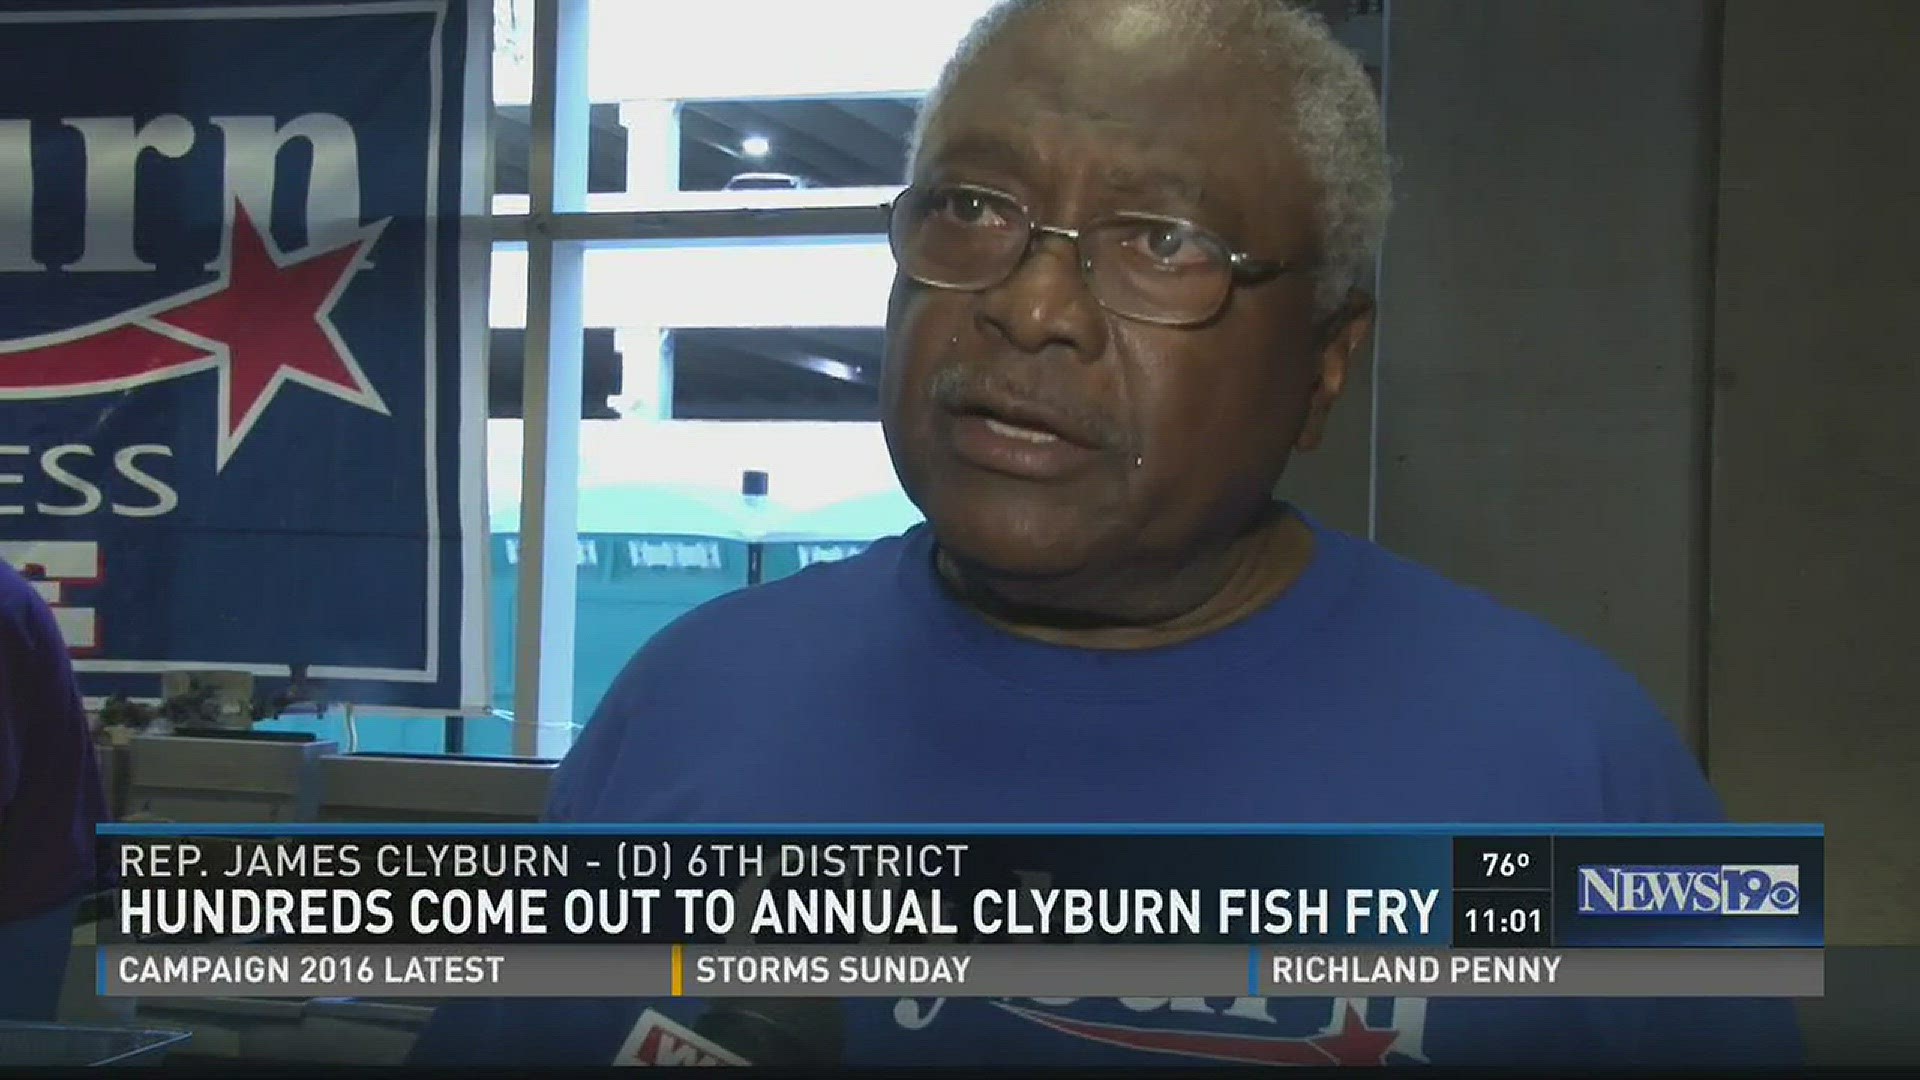 Hundreds come out to annual Jim Clyburn fish fry.